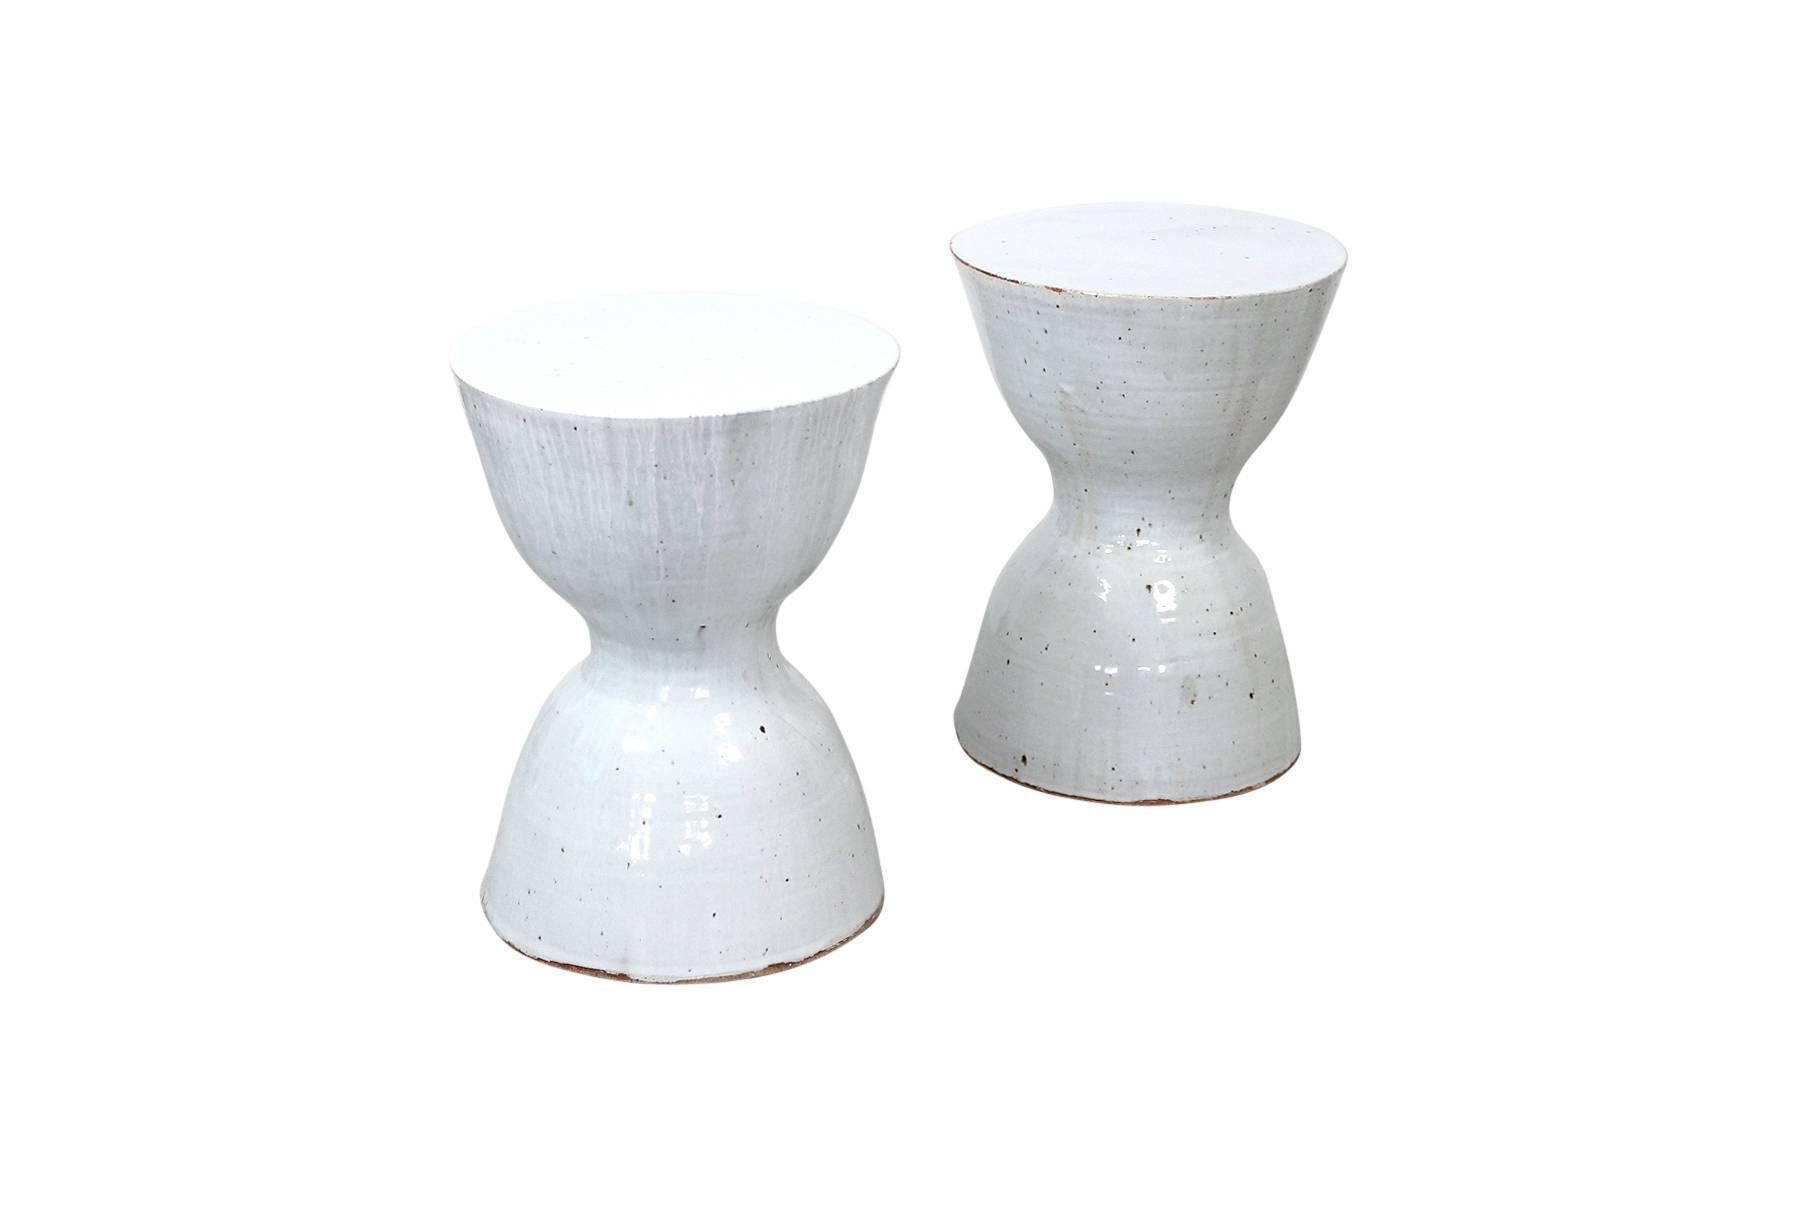 Pair of white ceramic hourglass shaped stools or tables by Tariki Studio. These pieces feature a delicate textural white glaze inspired by the work of renowned British studio potter Bernard Howell Leach. Known at Studio Tariki as the 